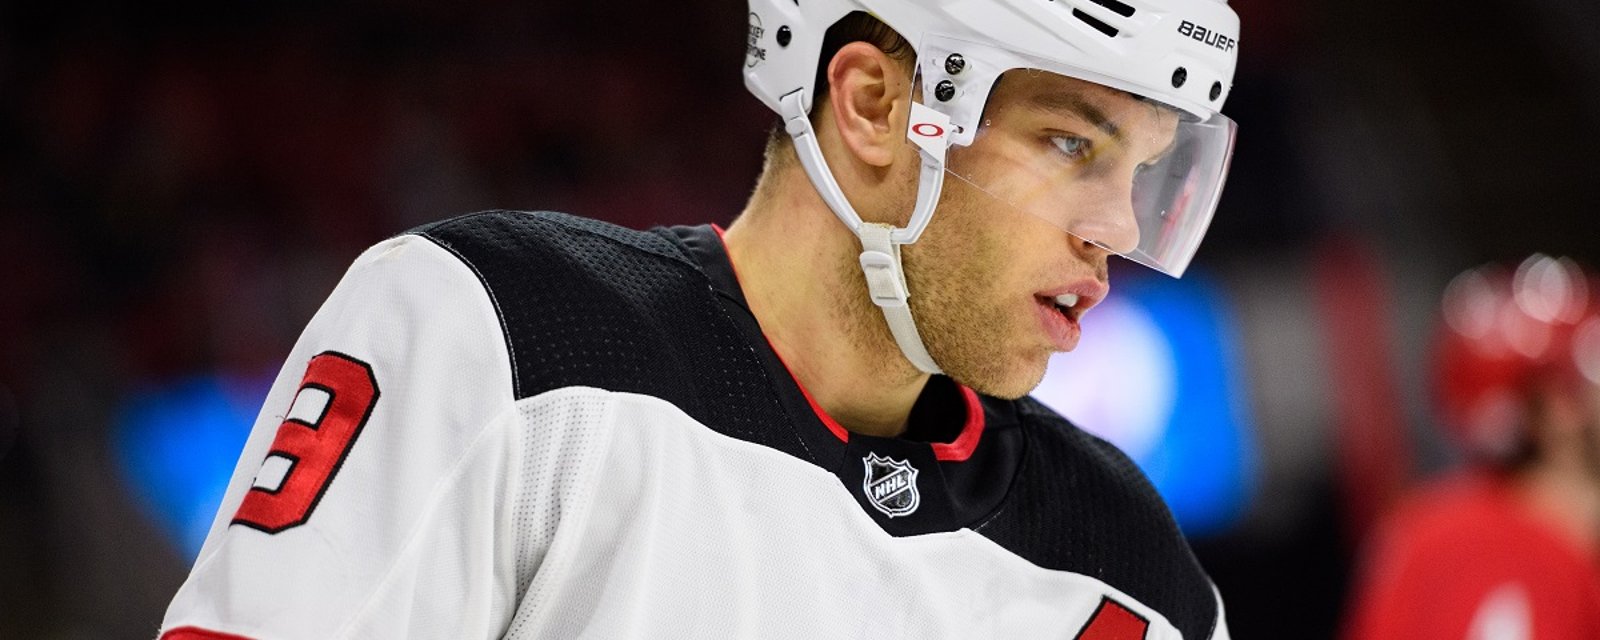 Taylor Hall receives a major demotion as trade rumors swirl.